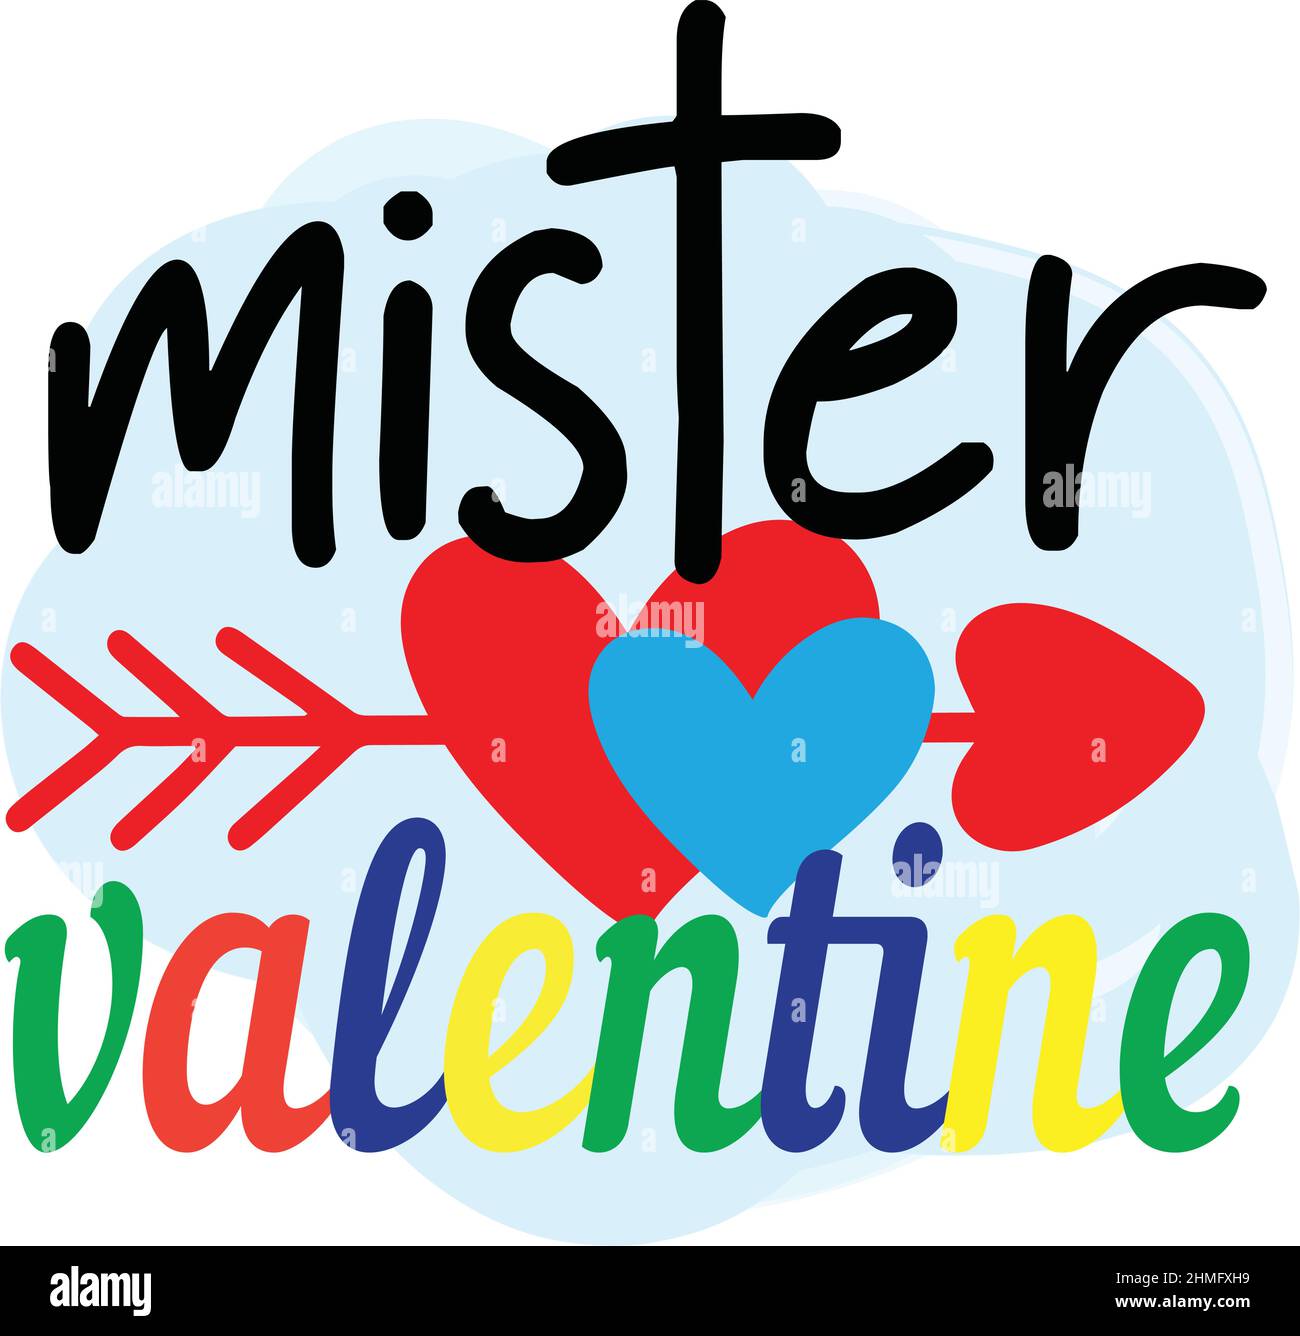 mister valentine valentines day t shirt monogram text vector template Stock Vector